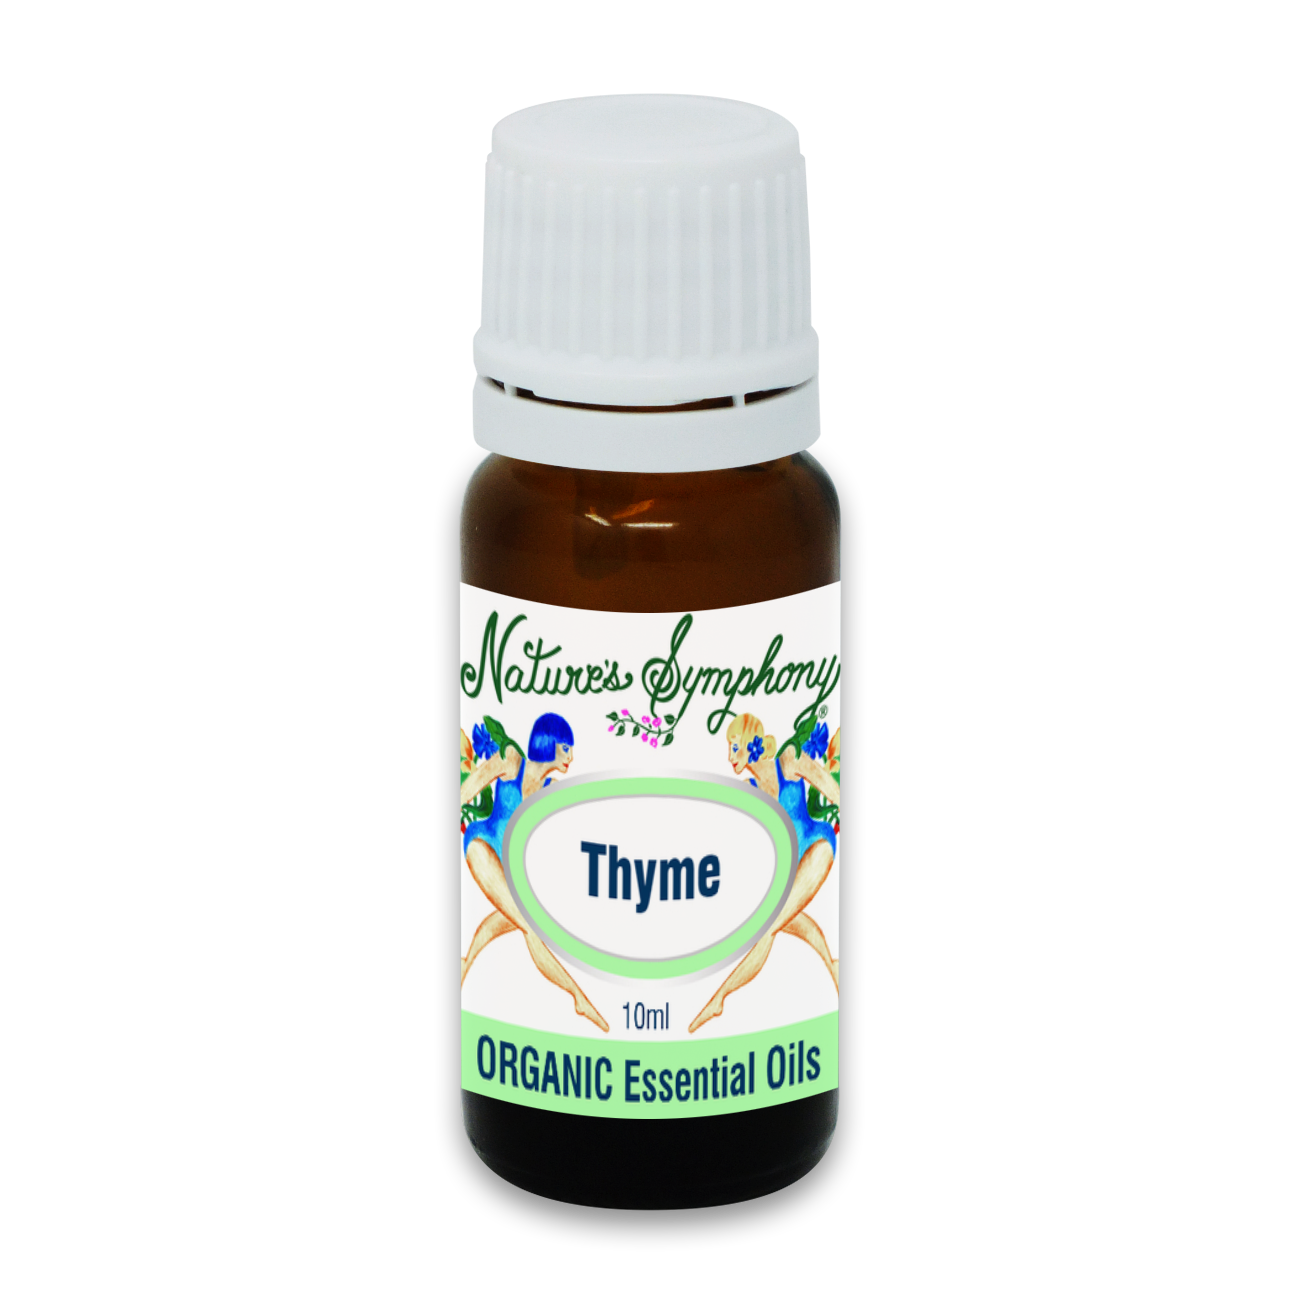 Thyme, Organic/Wildcrafted oil - 10ml